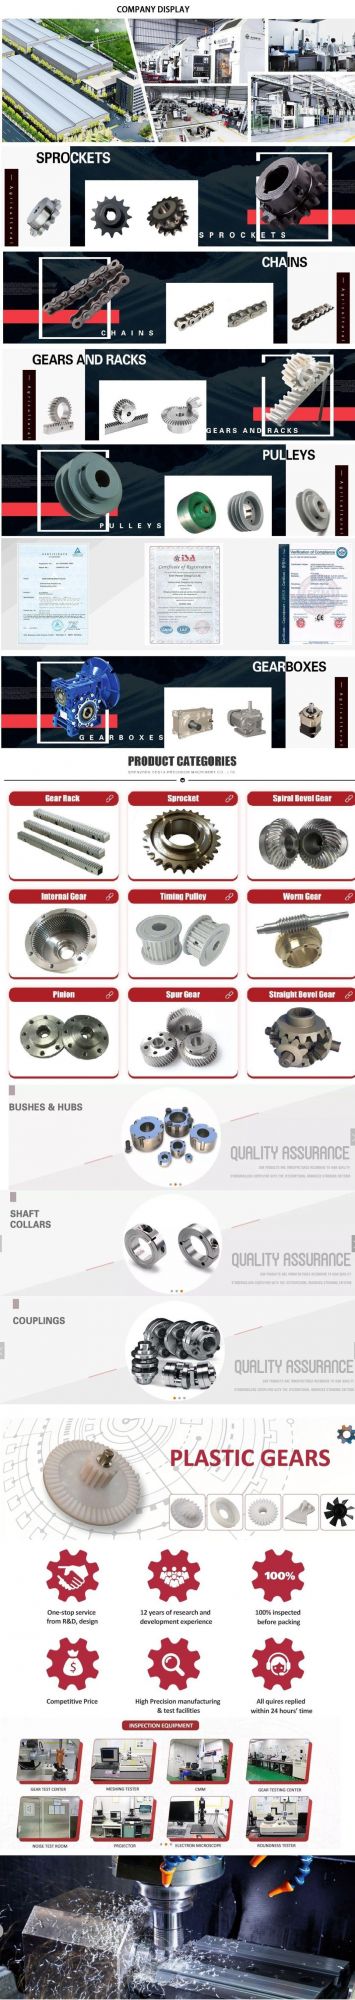 Bearings Angular Contact Roller Ball Price List Catalog Rod End Skateboard Thrust Bushing Connecting Rod Hybrid Ceramic Release Pulley Magnetic Bearing